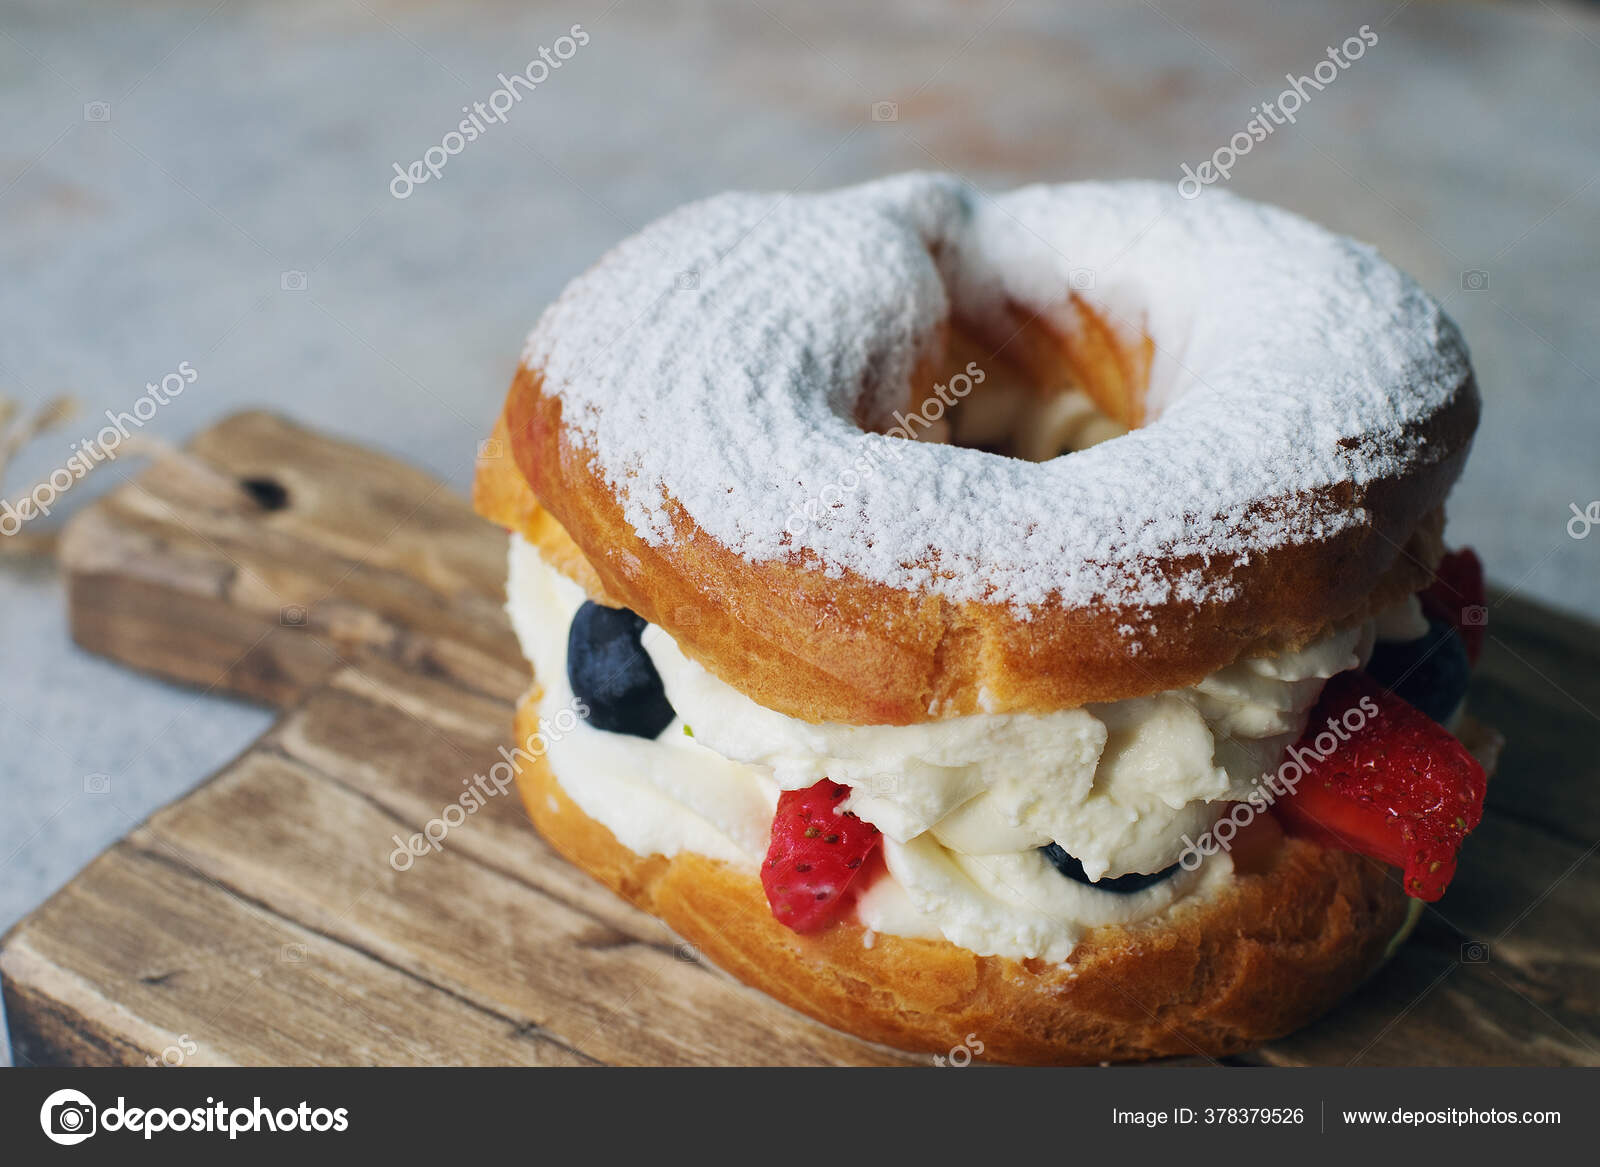 Tasty French Dessert Choux Pastry Cake Paris Brest Whipped Cream Stock Photo By C Orwald 378379526